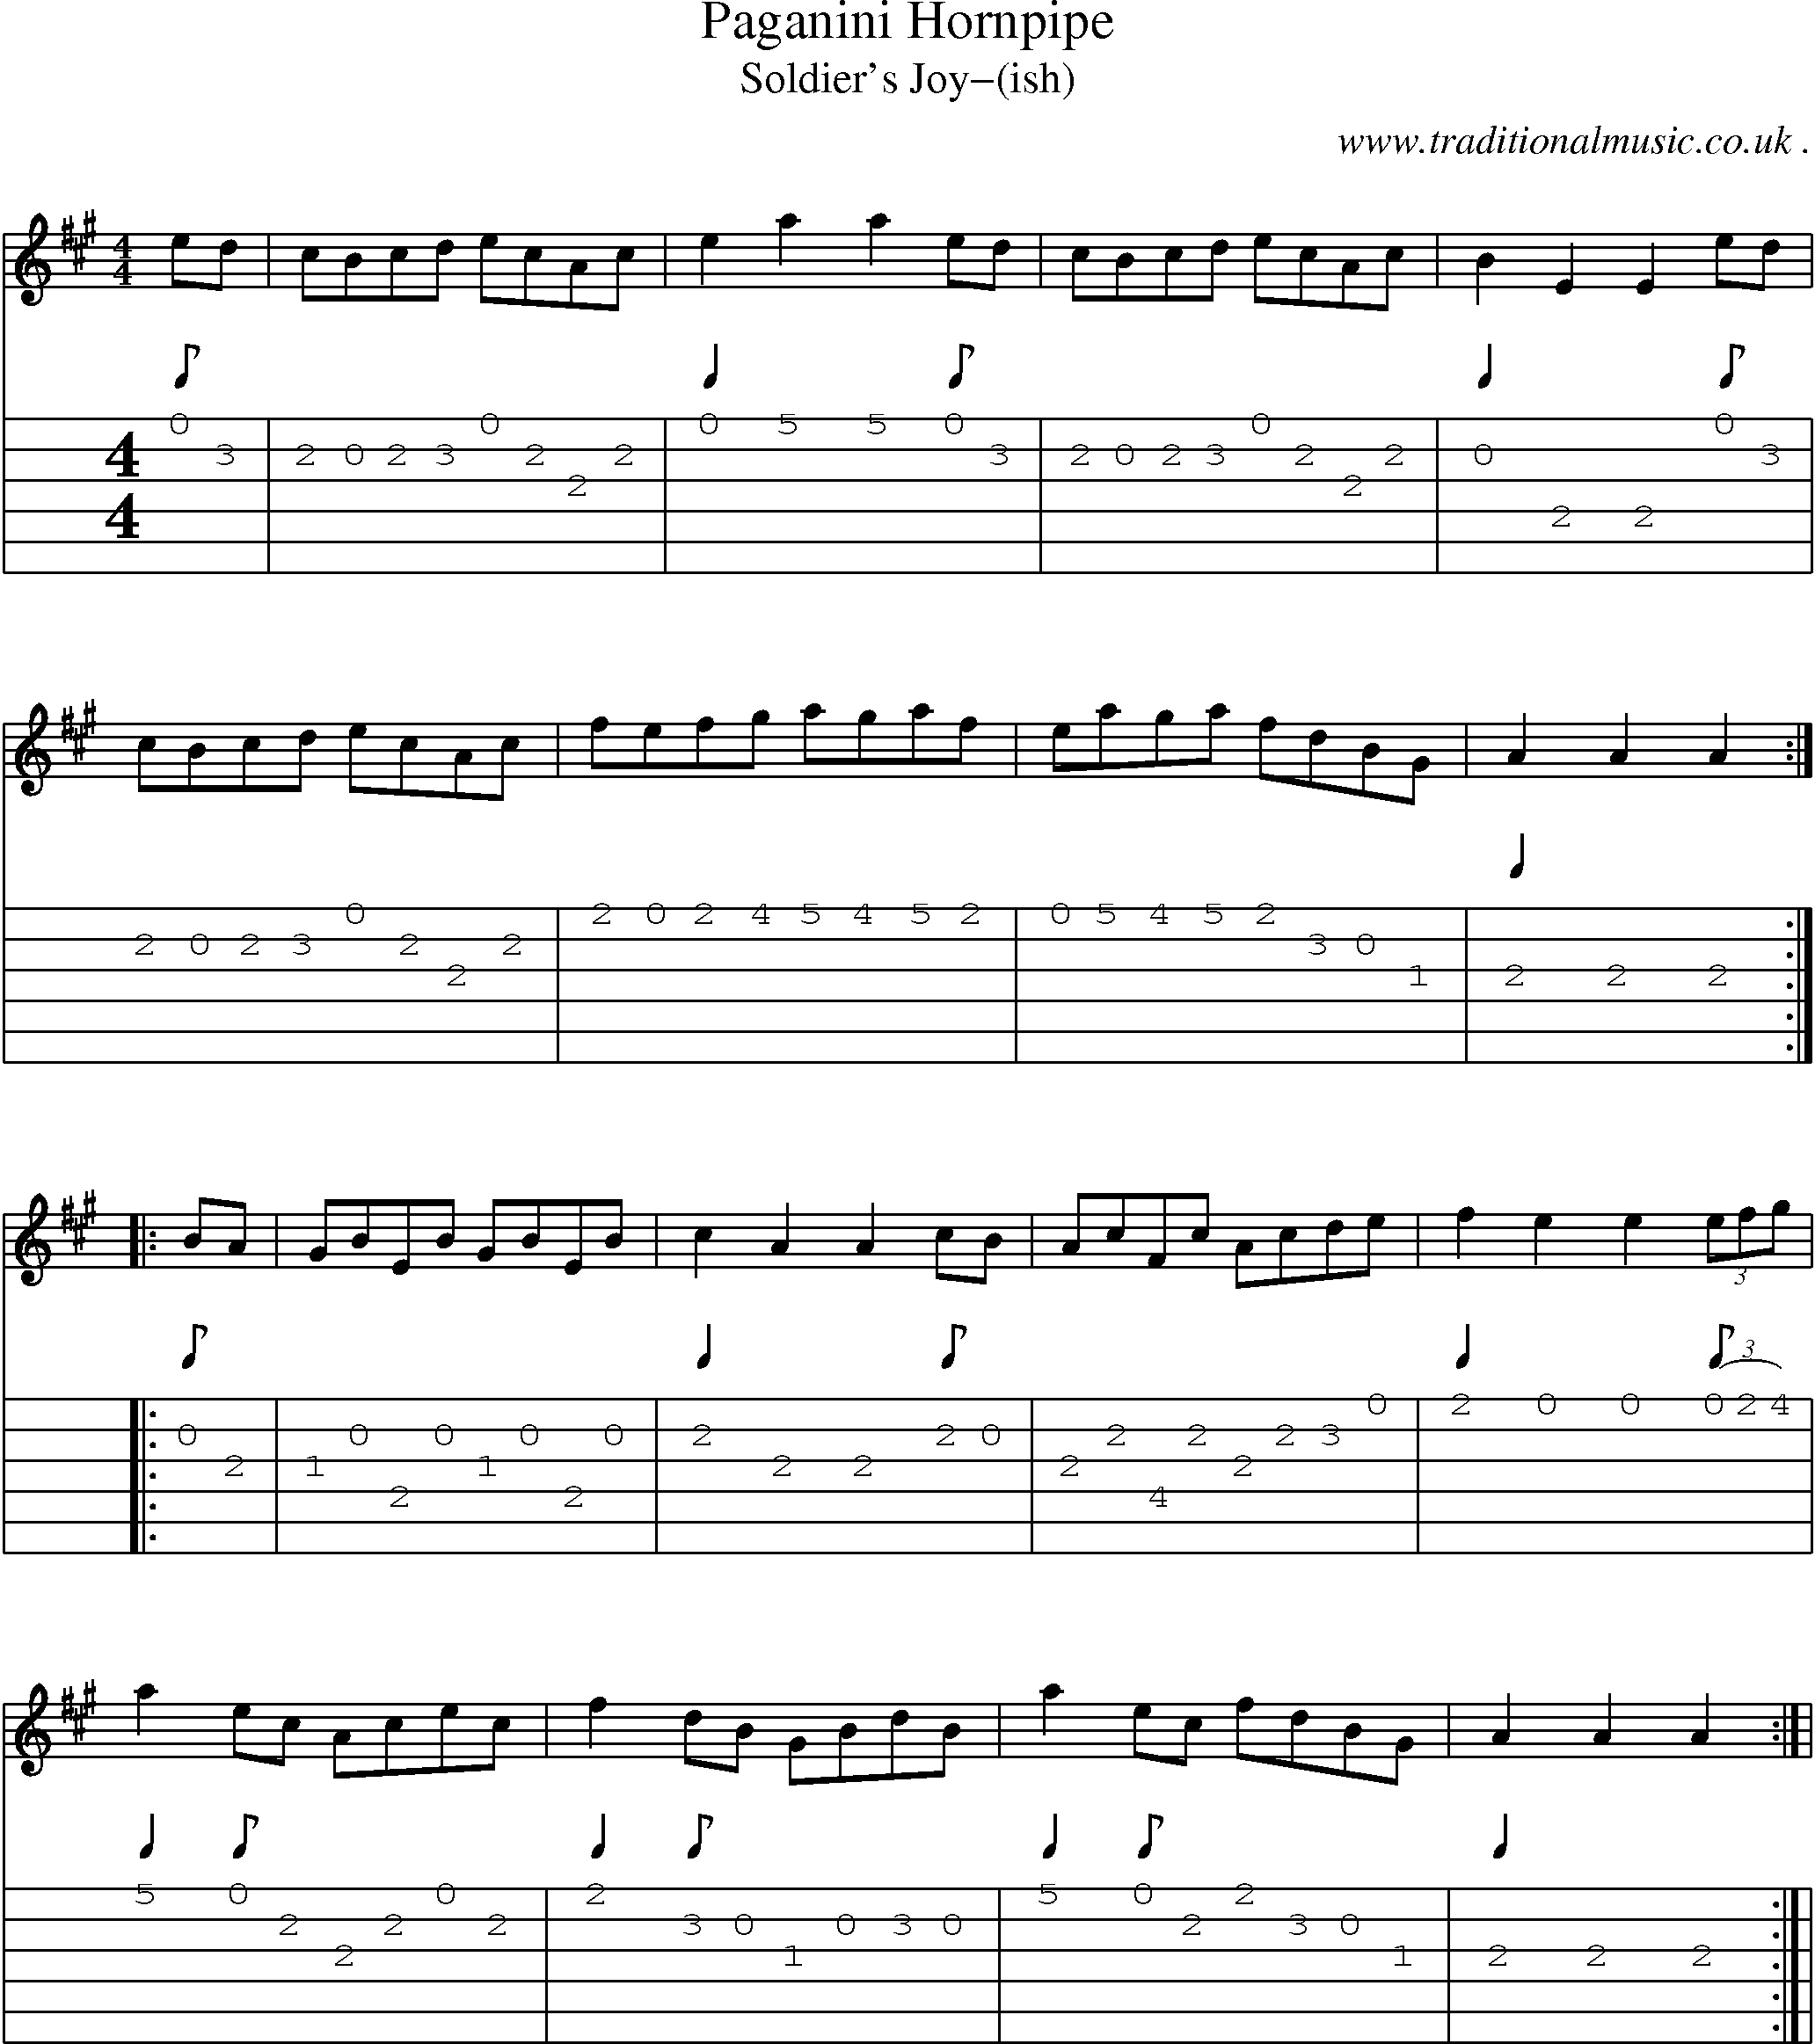 Sheet-Music and Guitar Tabs for Paganini Hornpipe